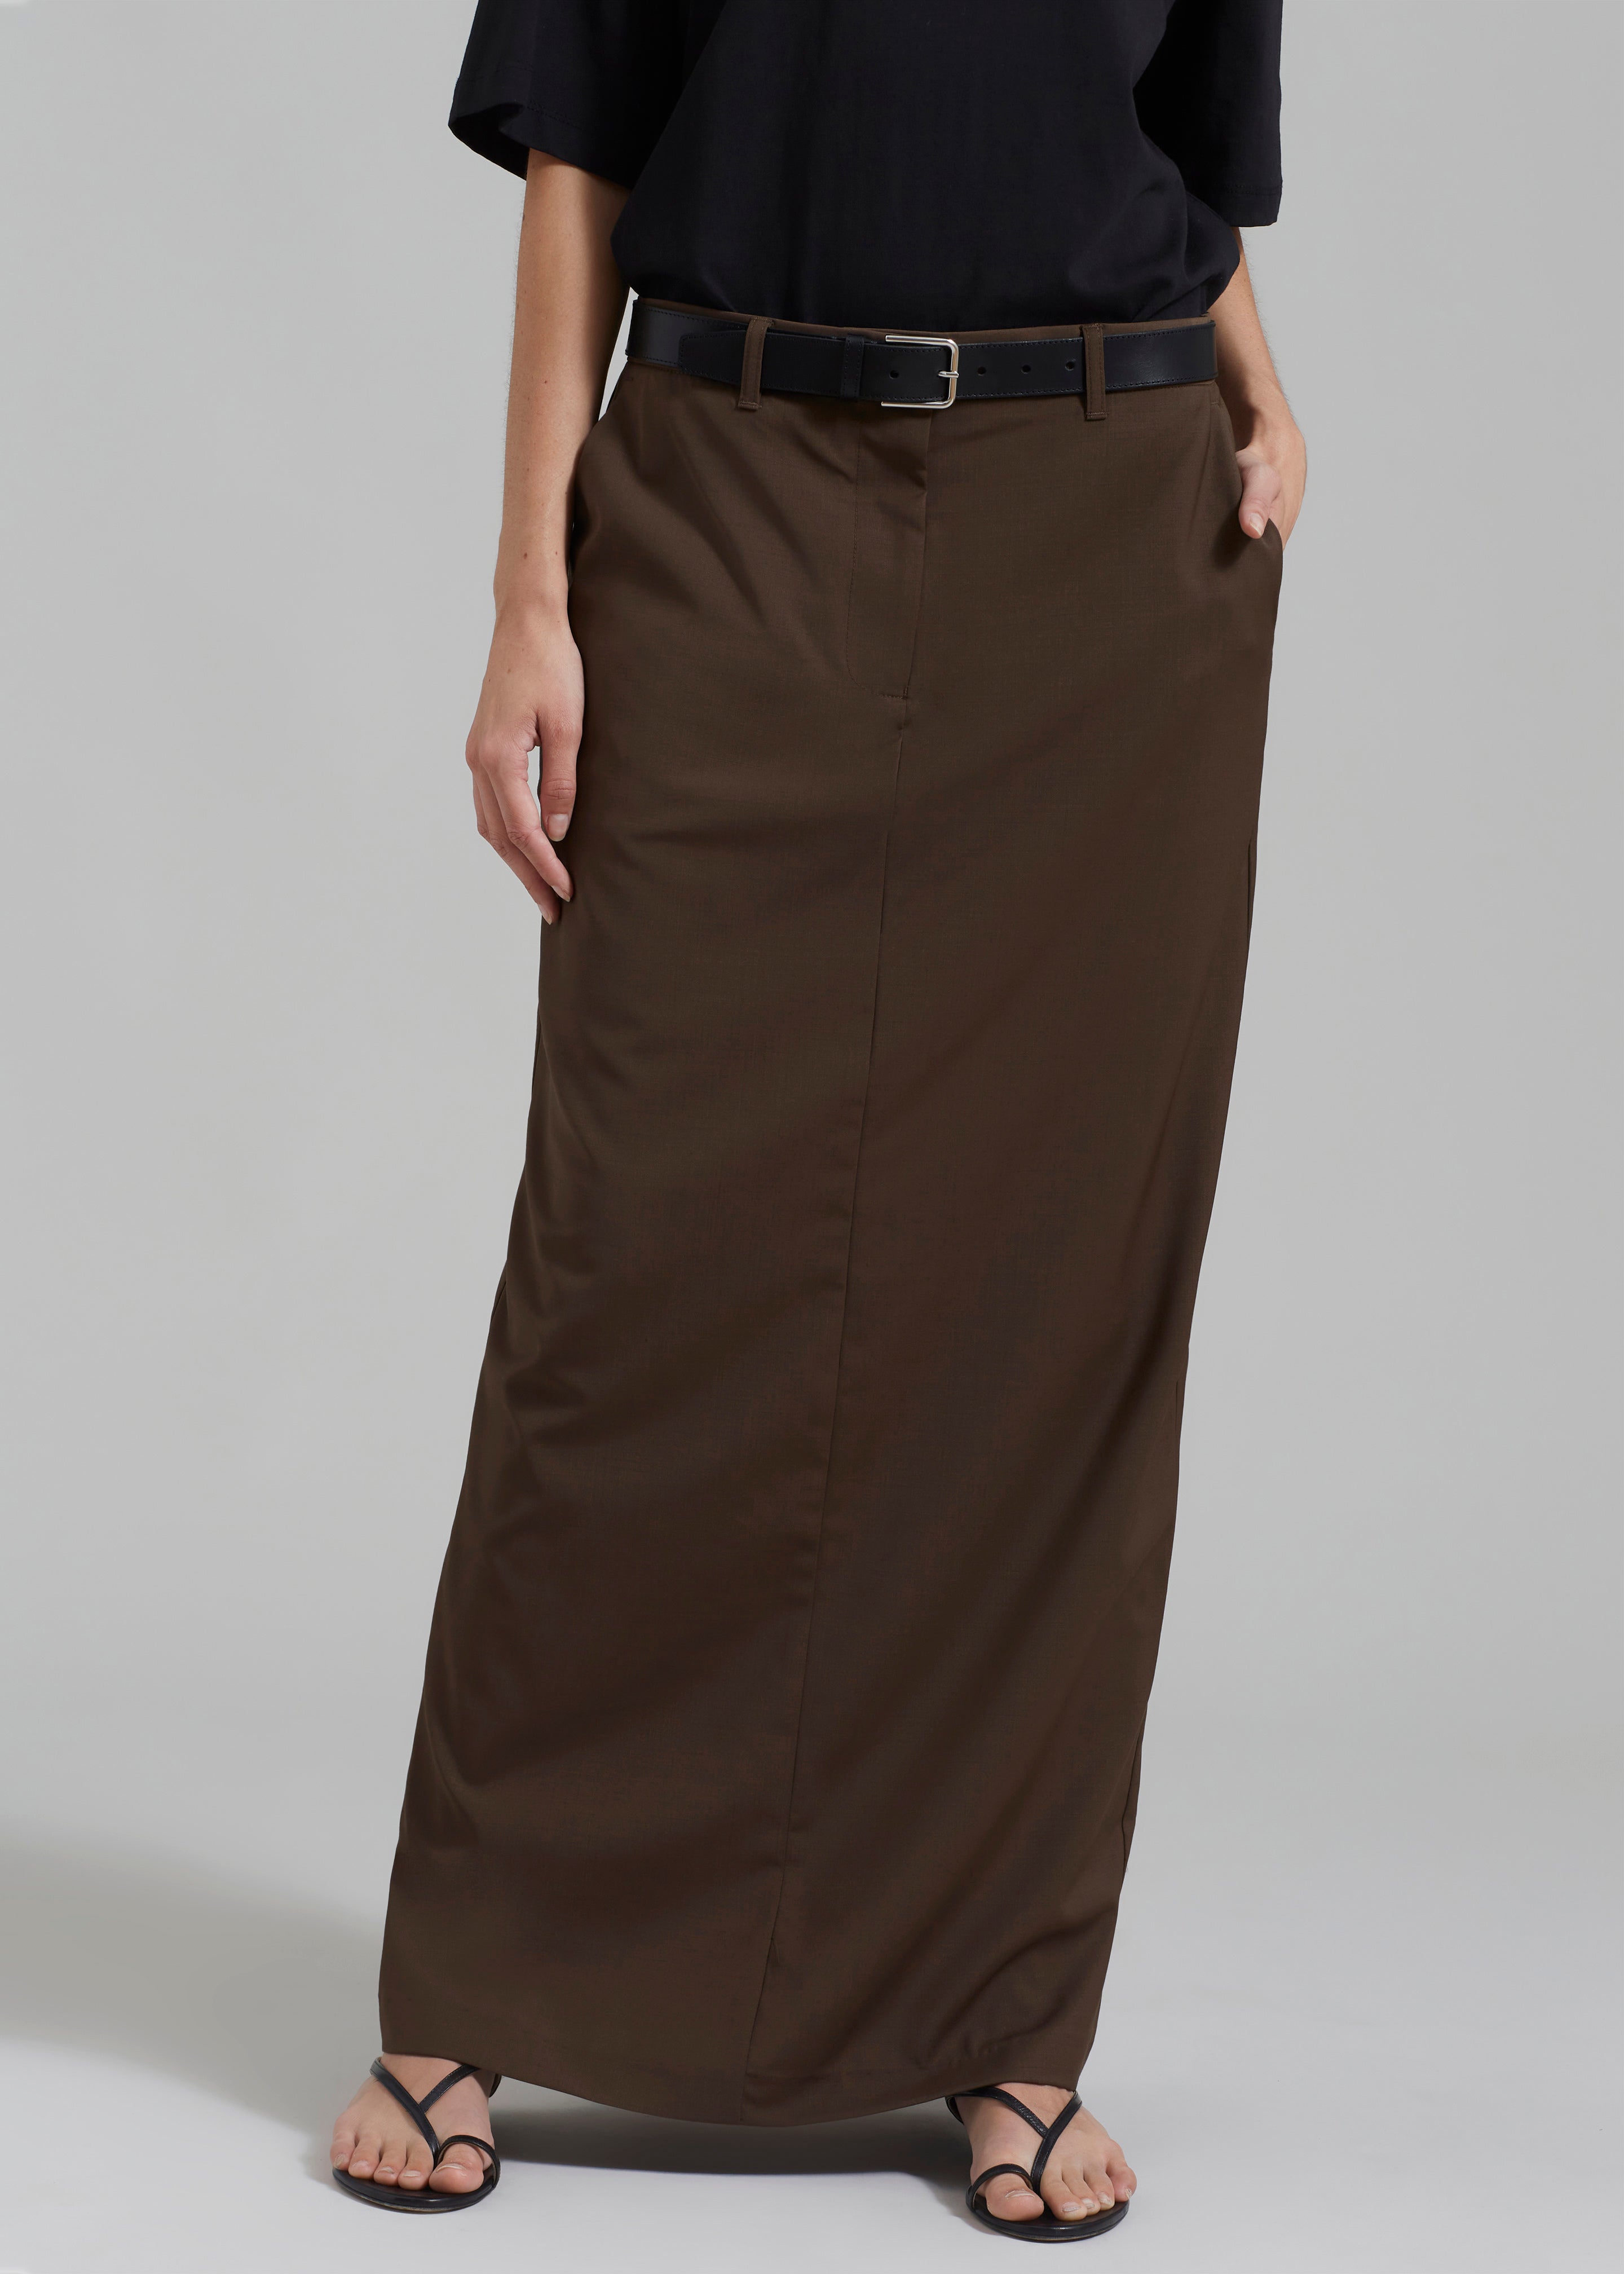 Matteau Relaxed Tailored Skirt - Coffee - 2